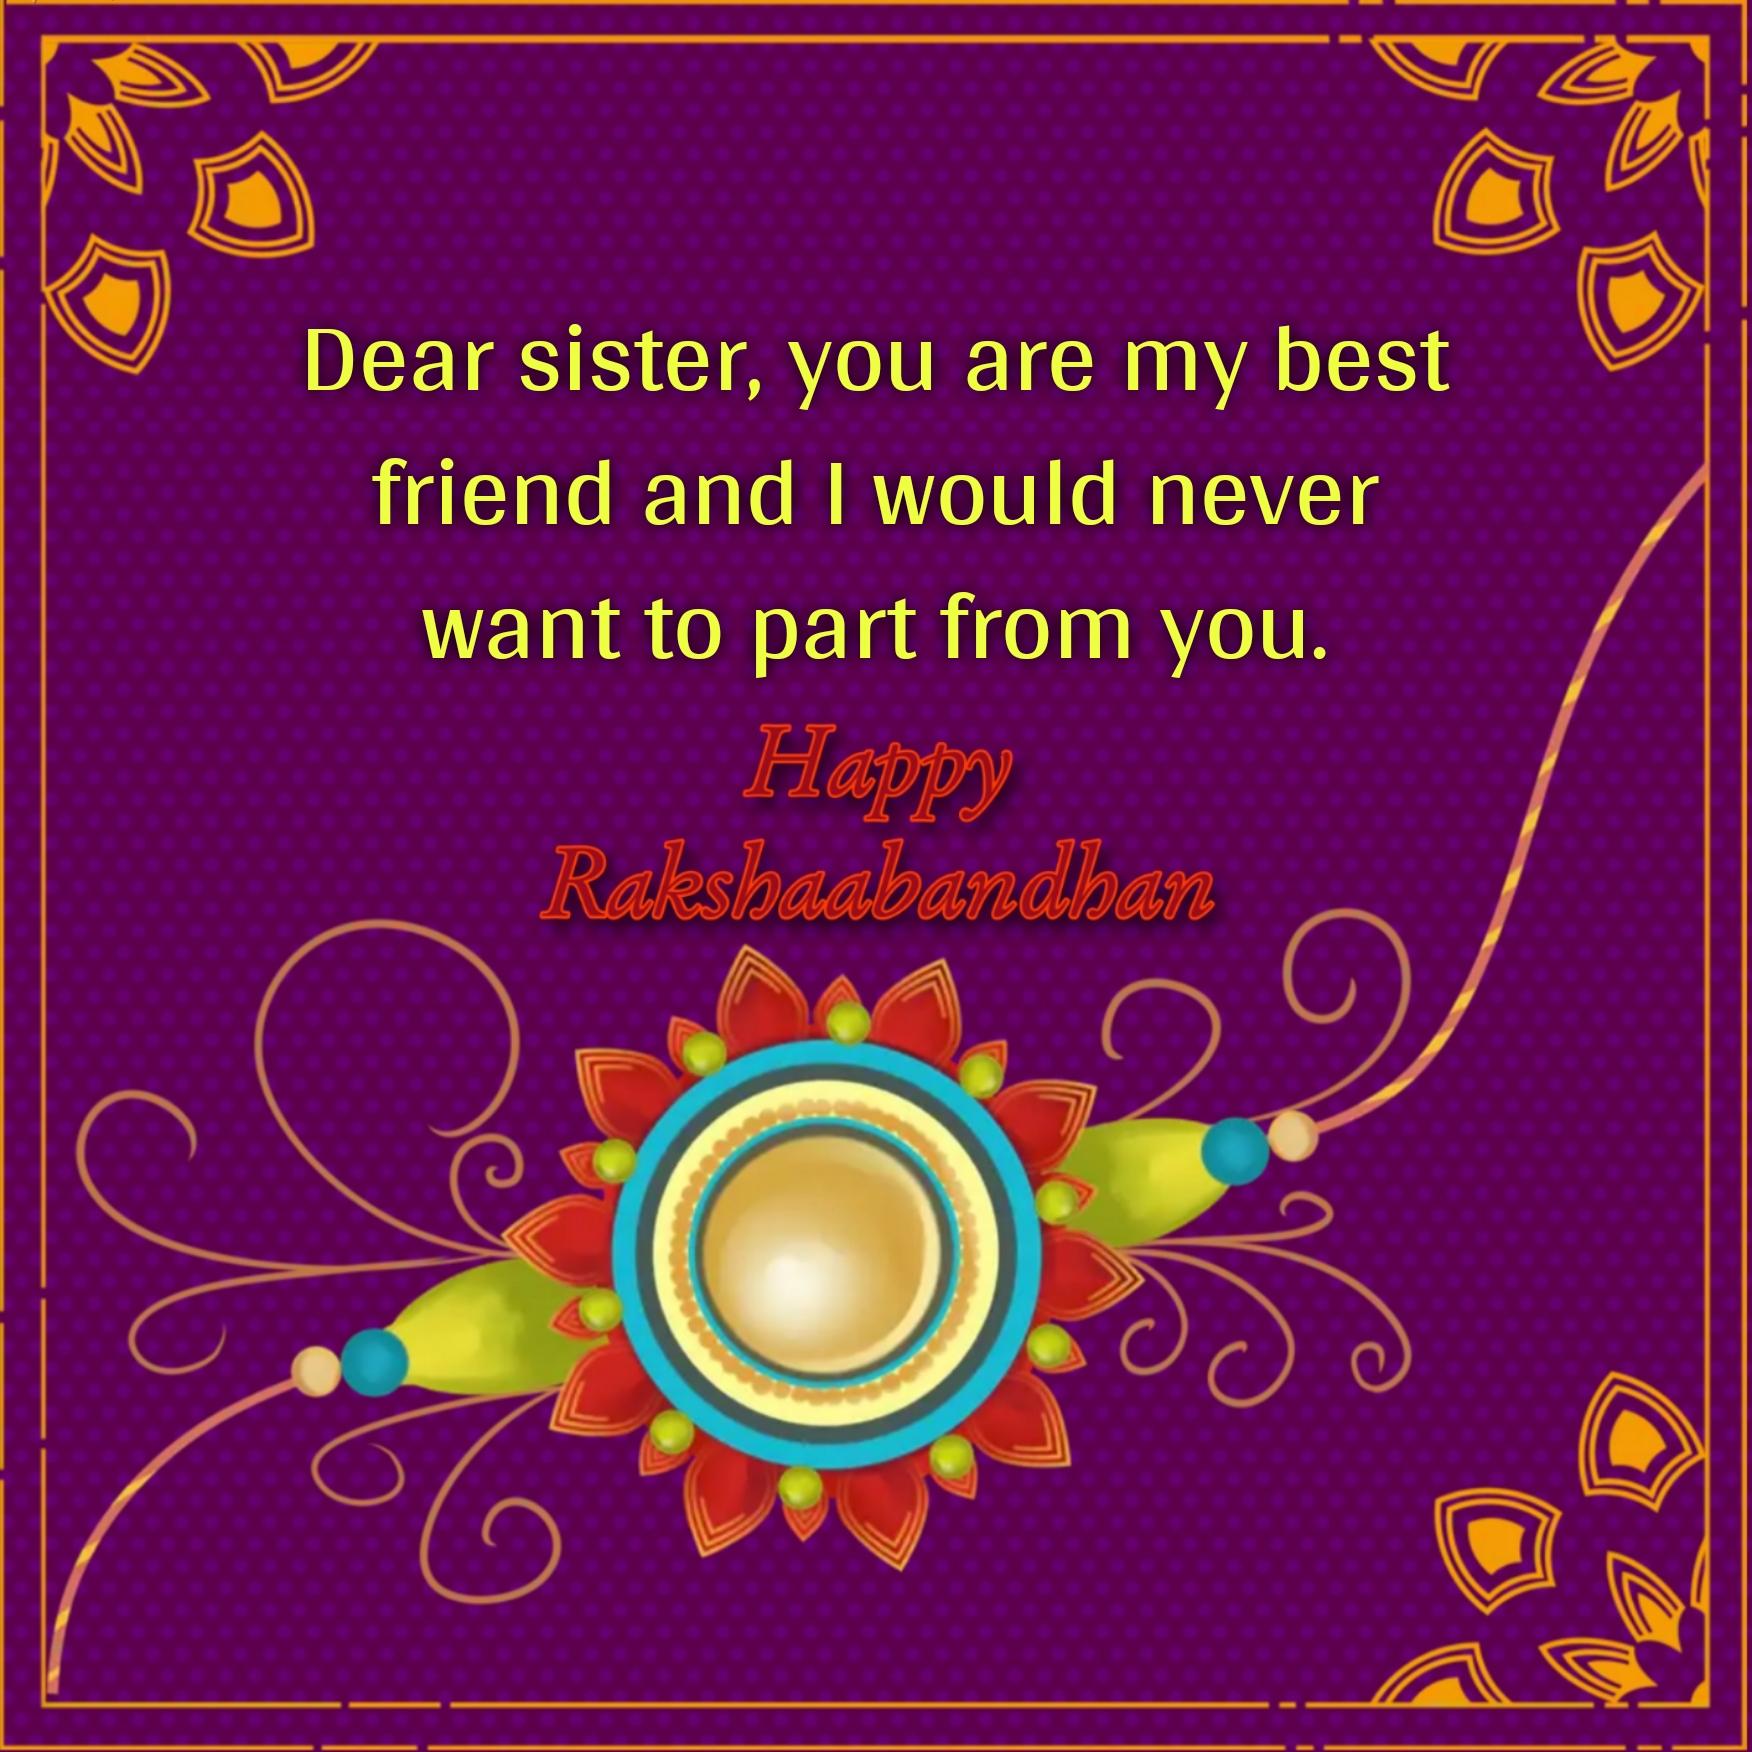 Dear sister you are my best friend